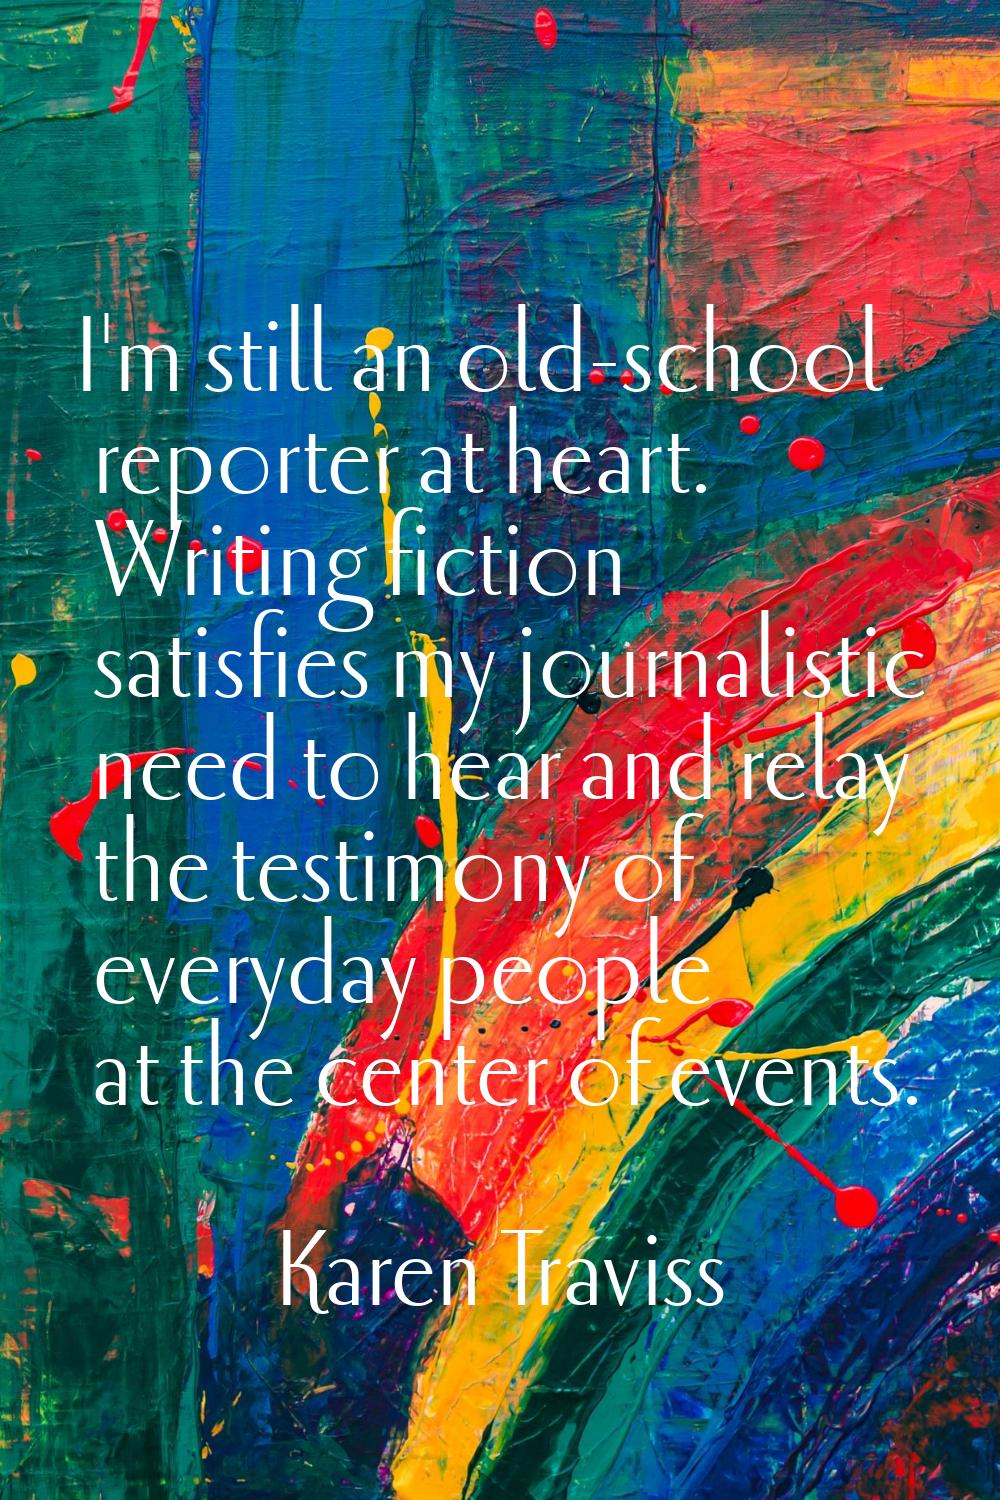 I'm still an old-school reporter at heart. Writing fiction satisfies my journalistic need to hear a